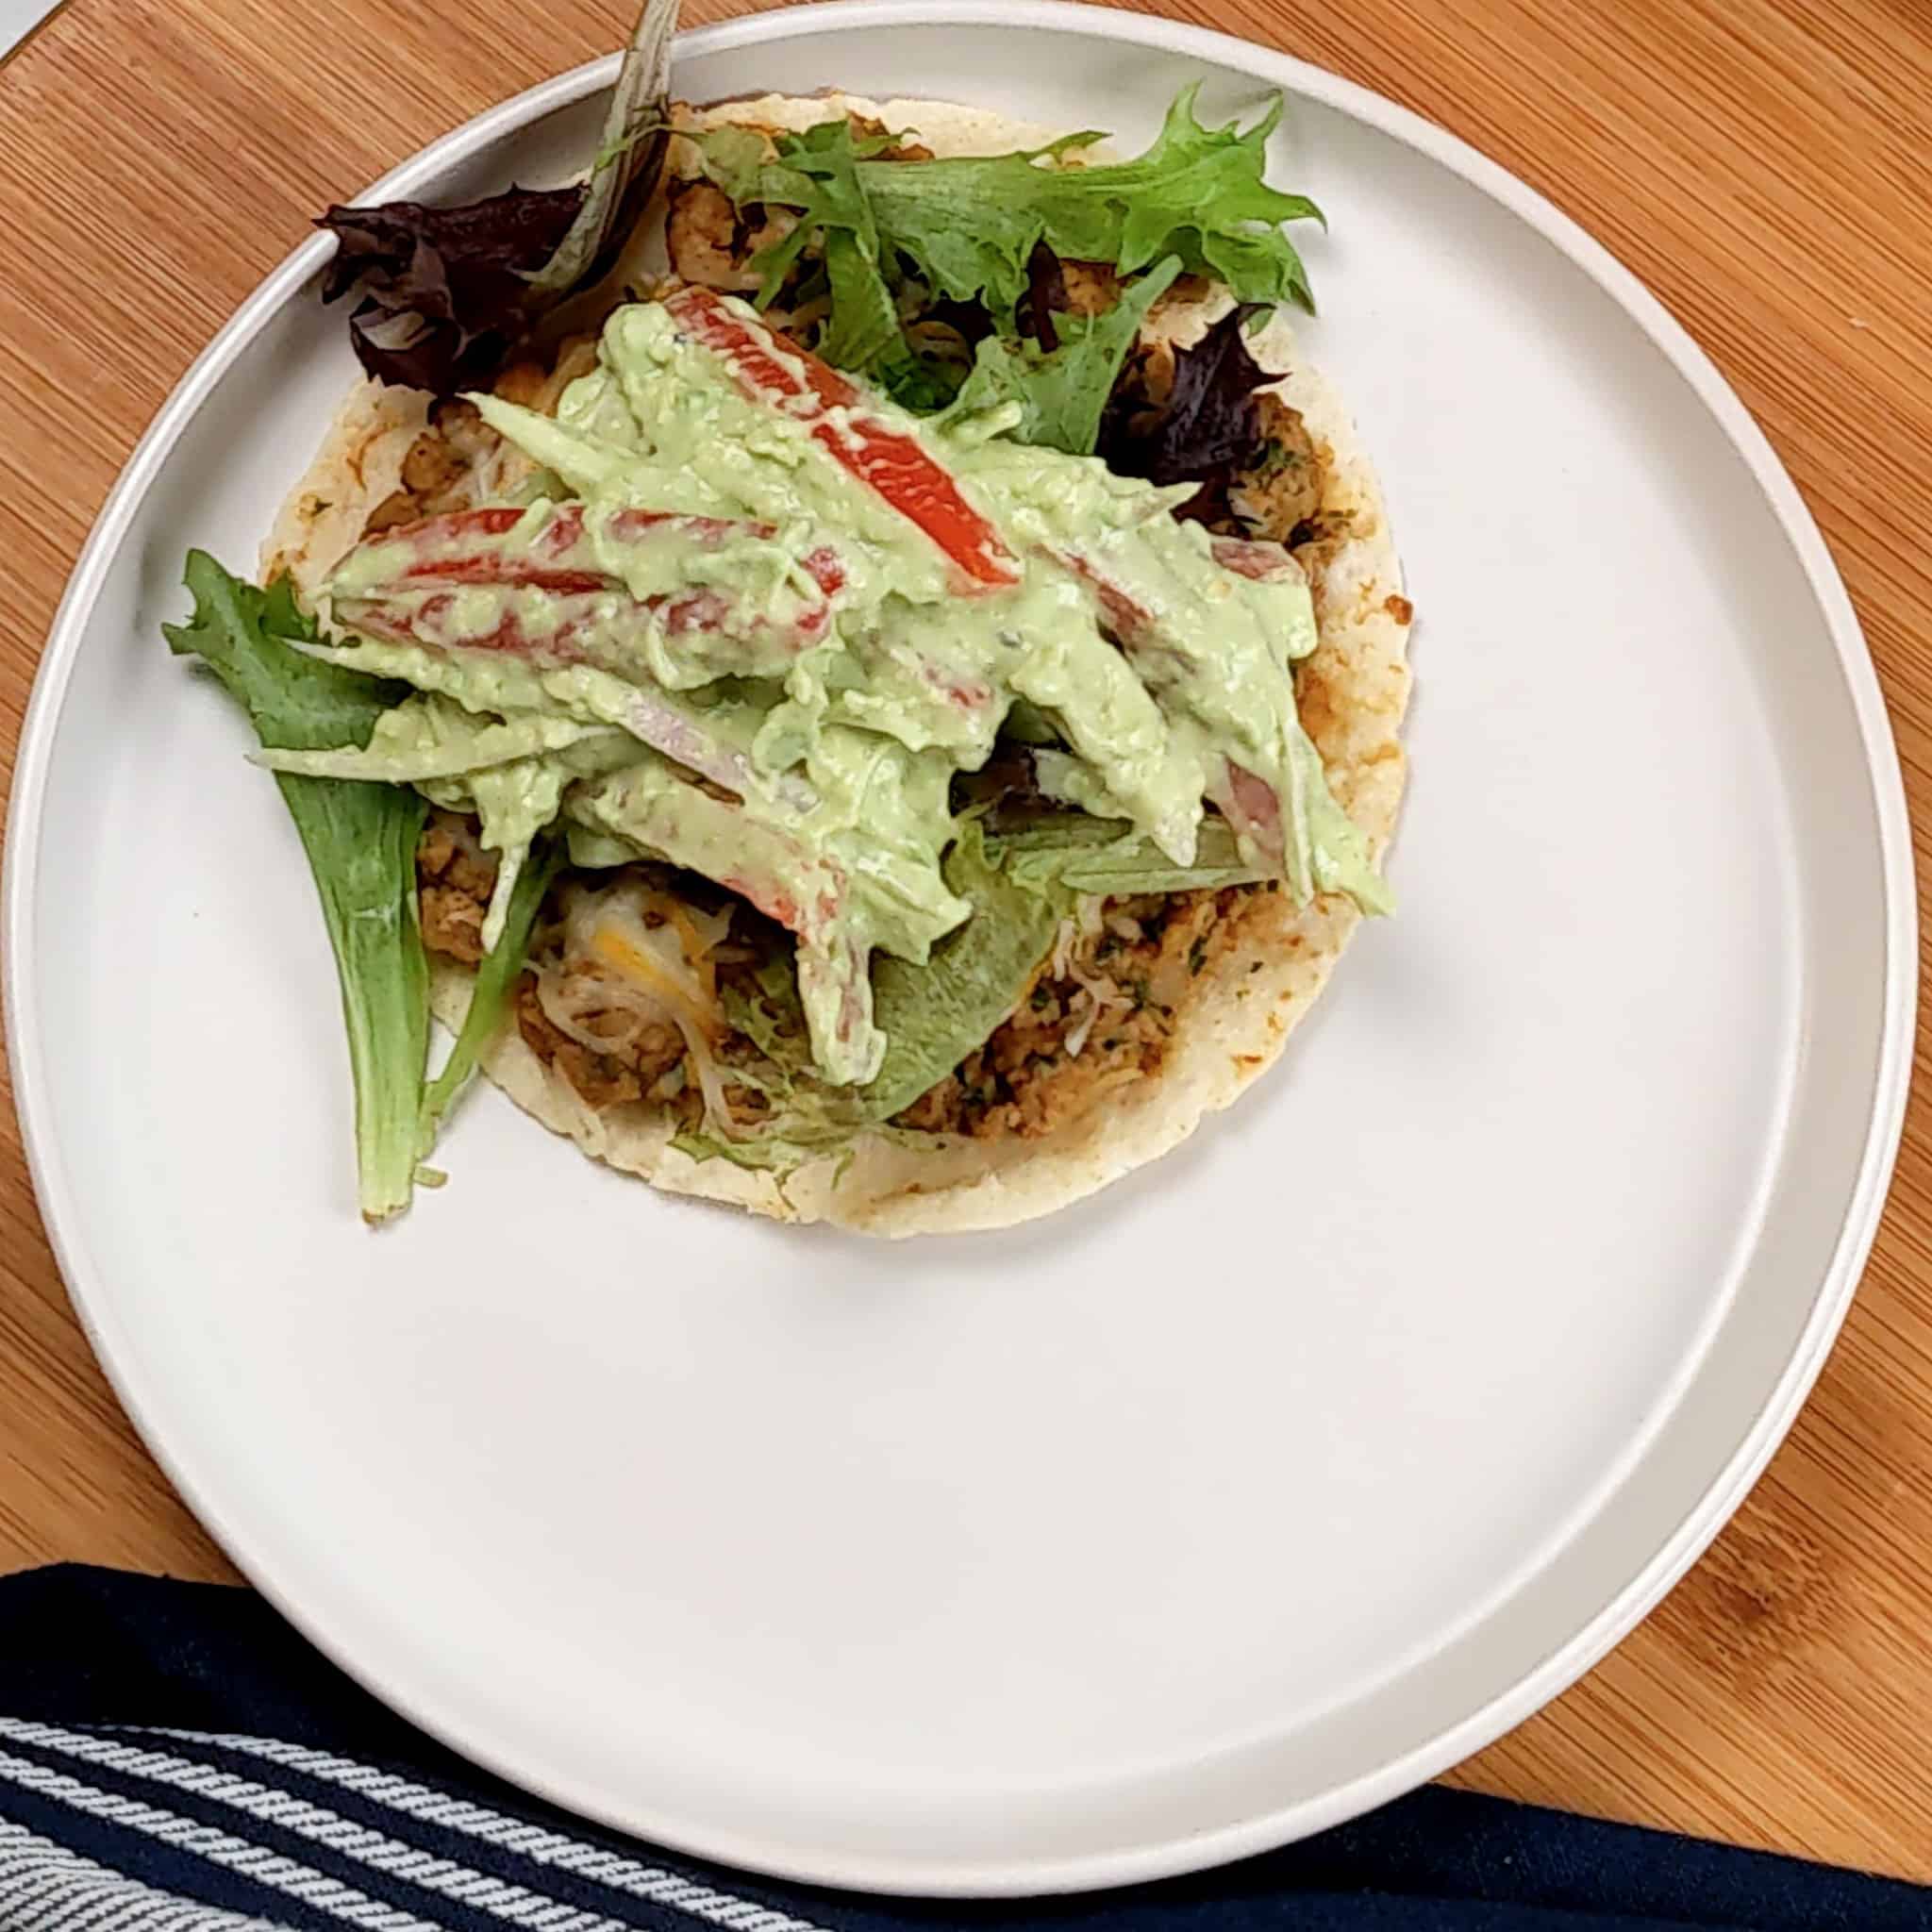 one flour tortilla packed with cooked seasoned ground turkey and refried beans and melted cheese, topped with mixed greens, and avocado cream tomato salad.